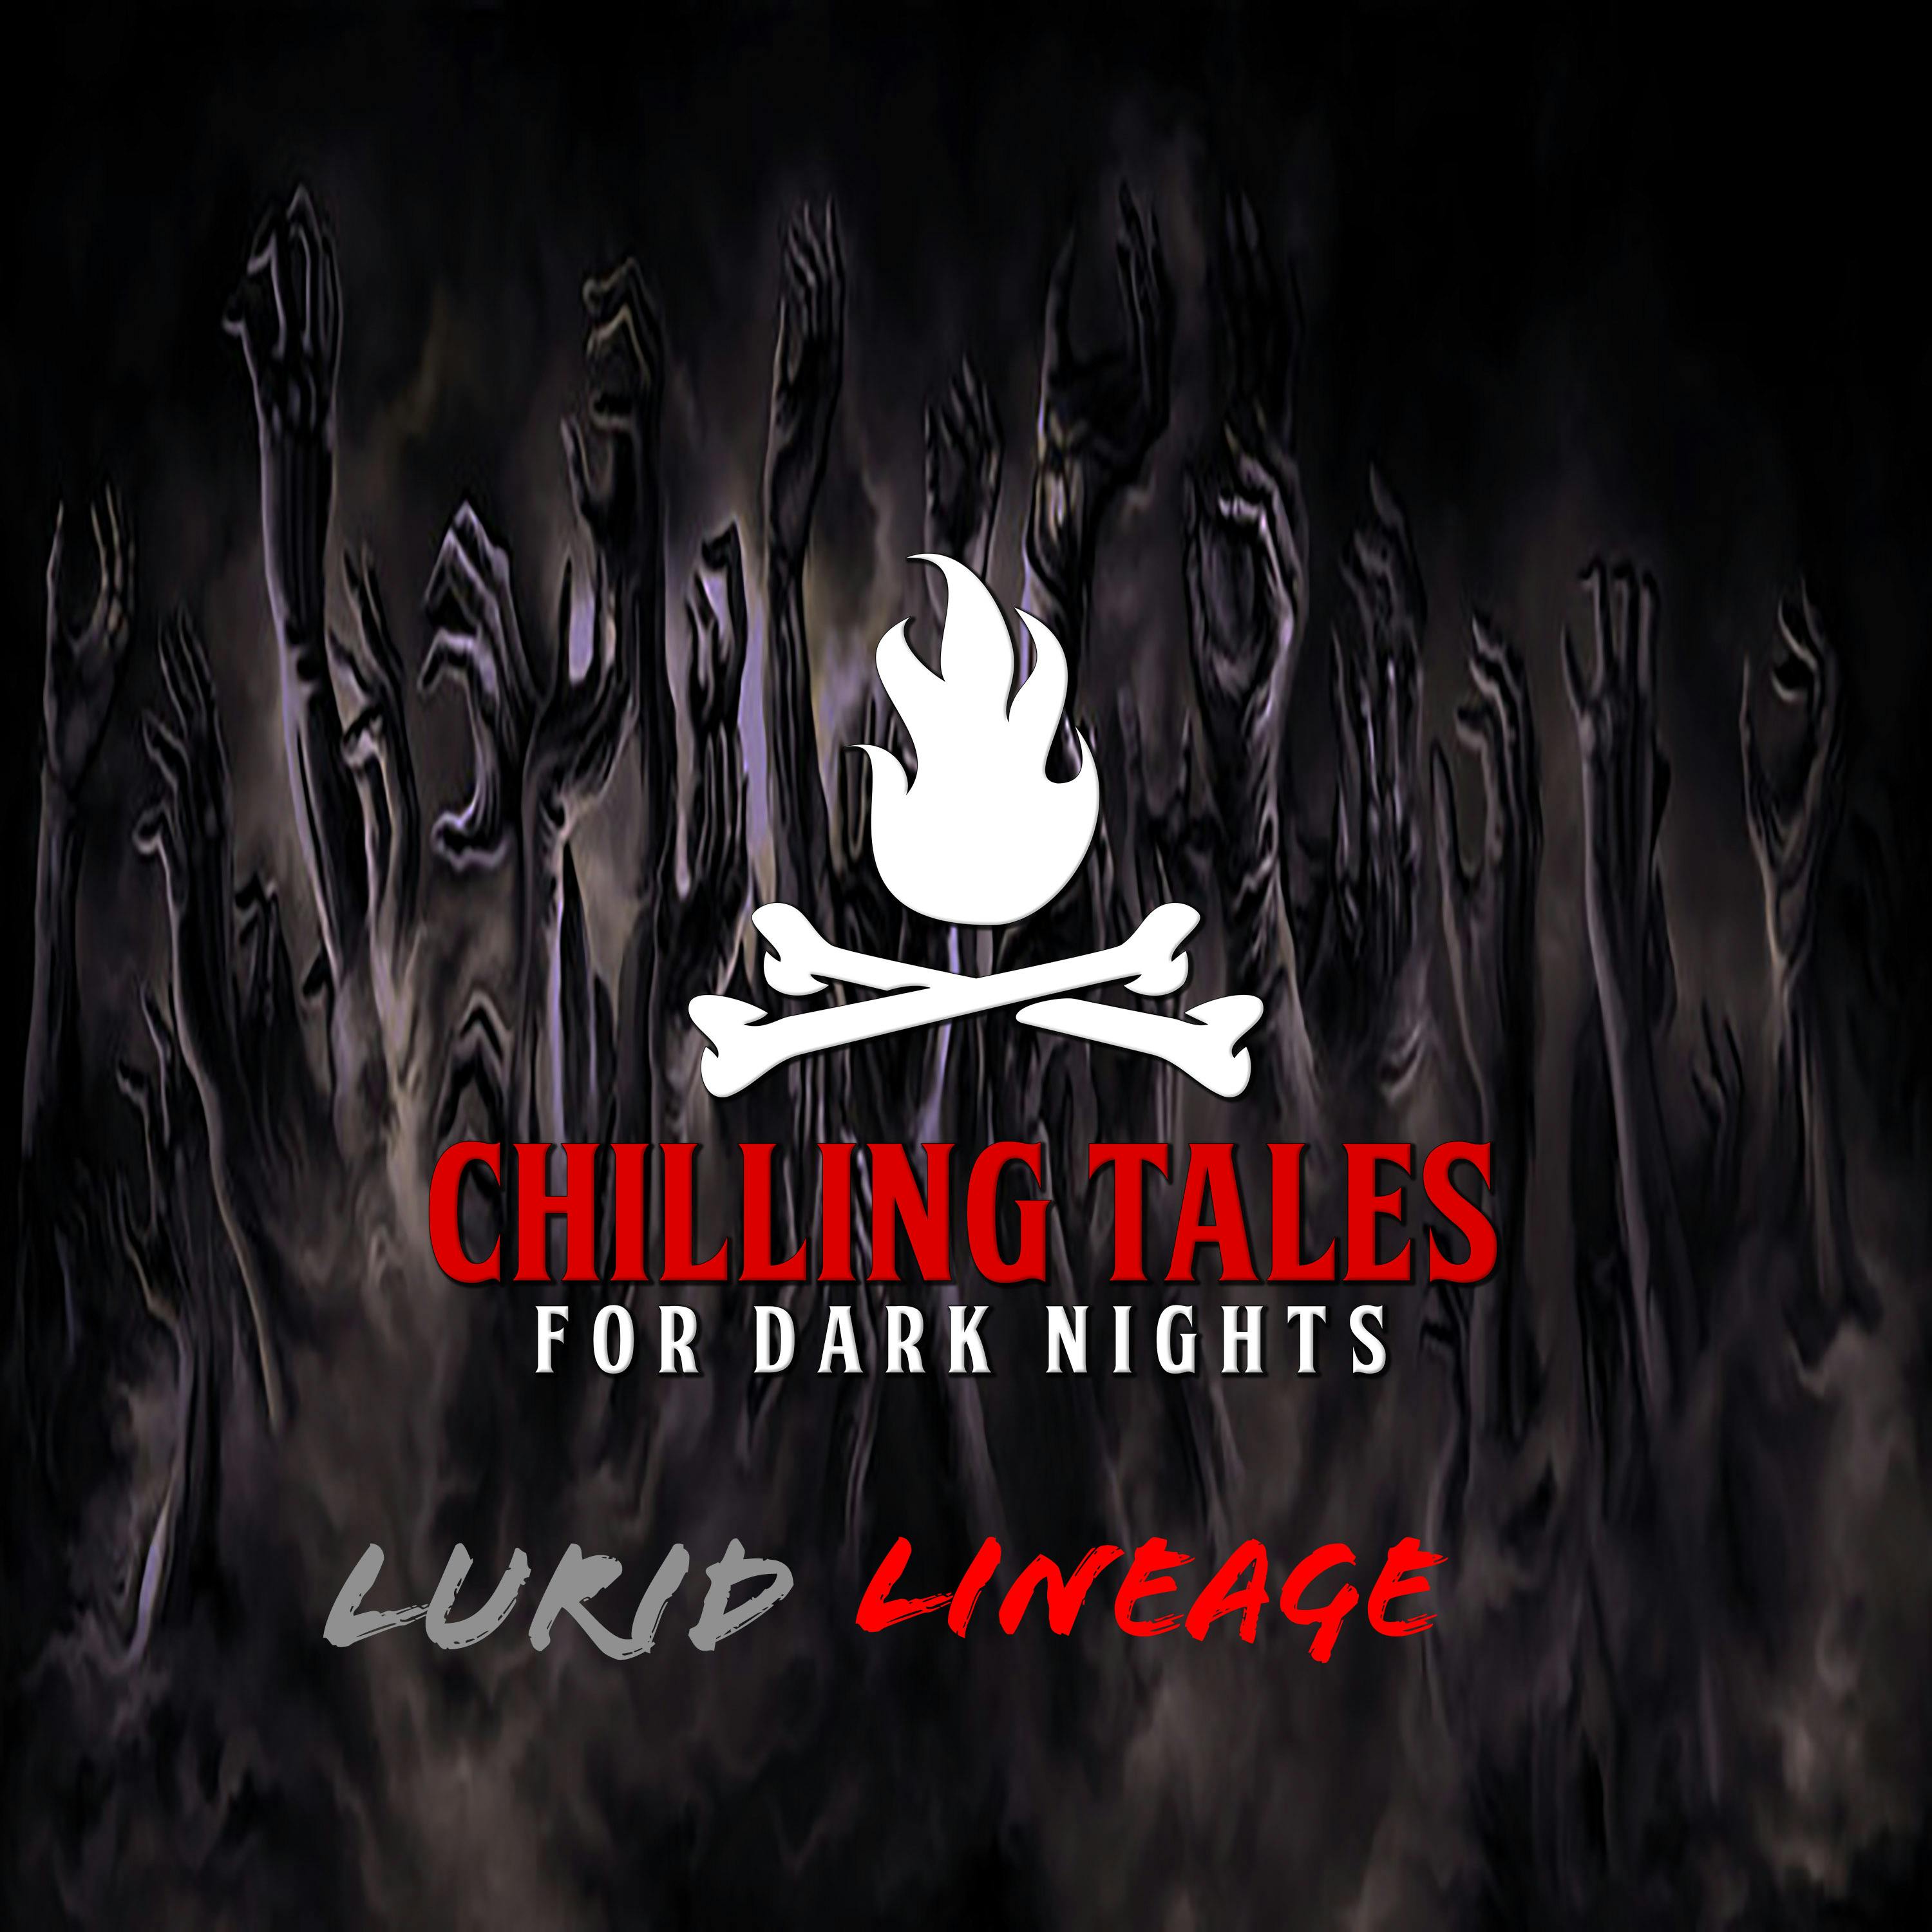 105: Lurid Lineage - Chilling Tales for Dark Nights